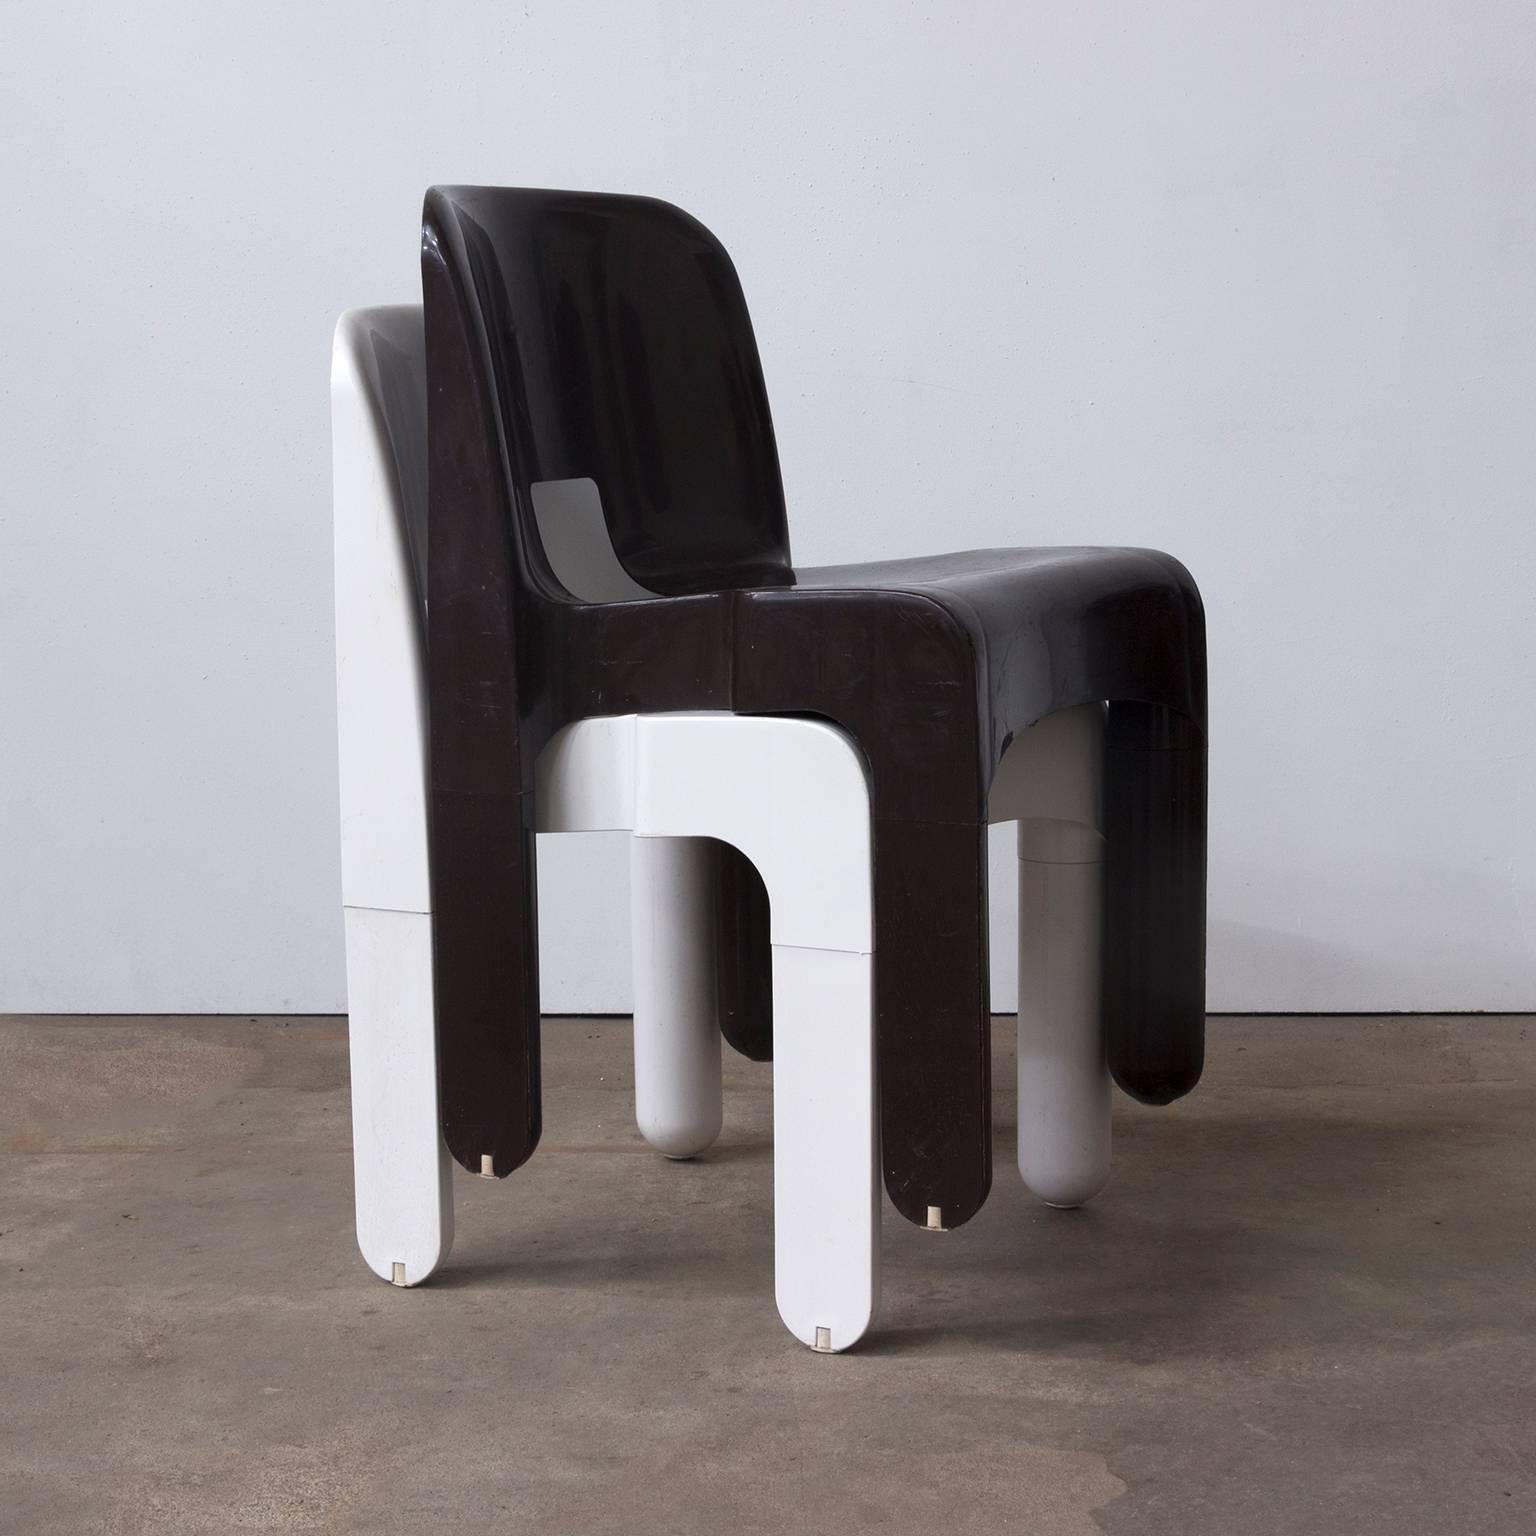 Mid-20th Century 1967 Joe Colombo, Universale Plastic Chair, Type 4867 in Chocolate Brown & White